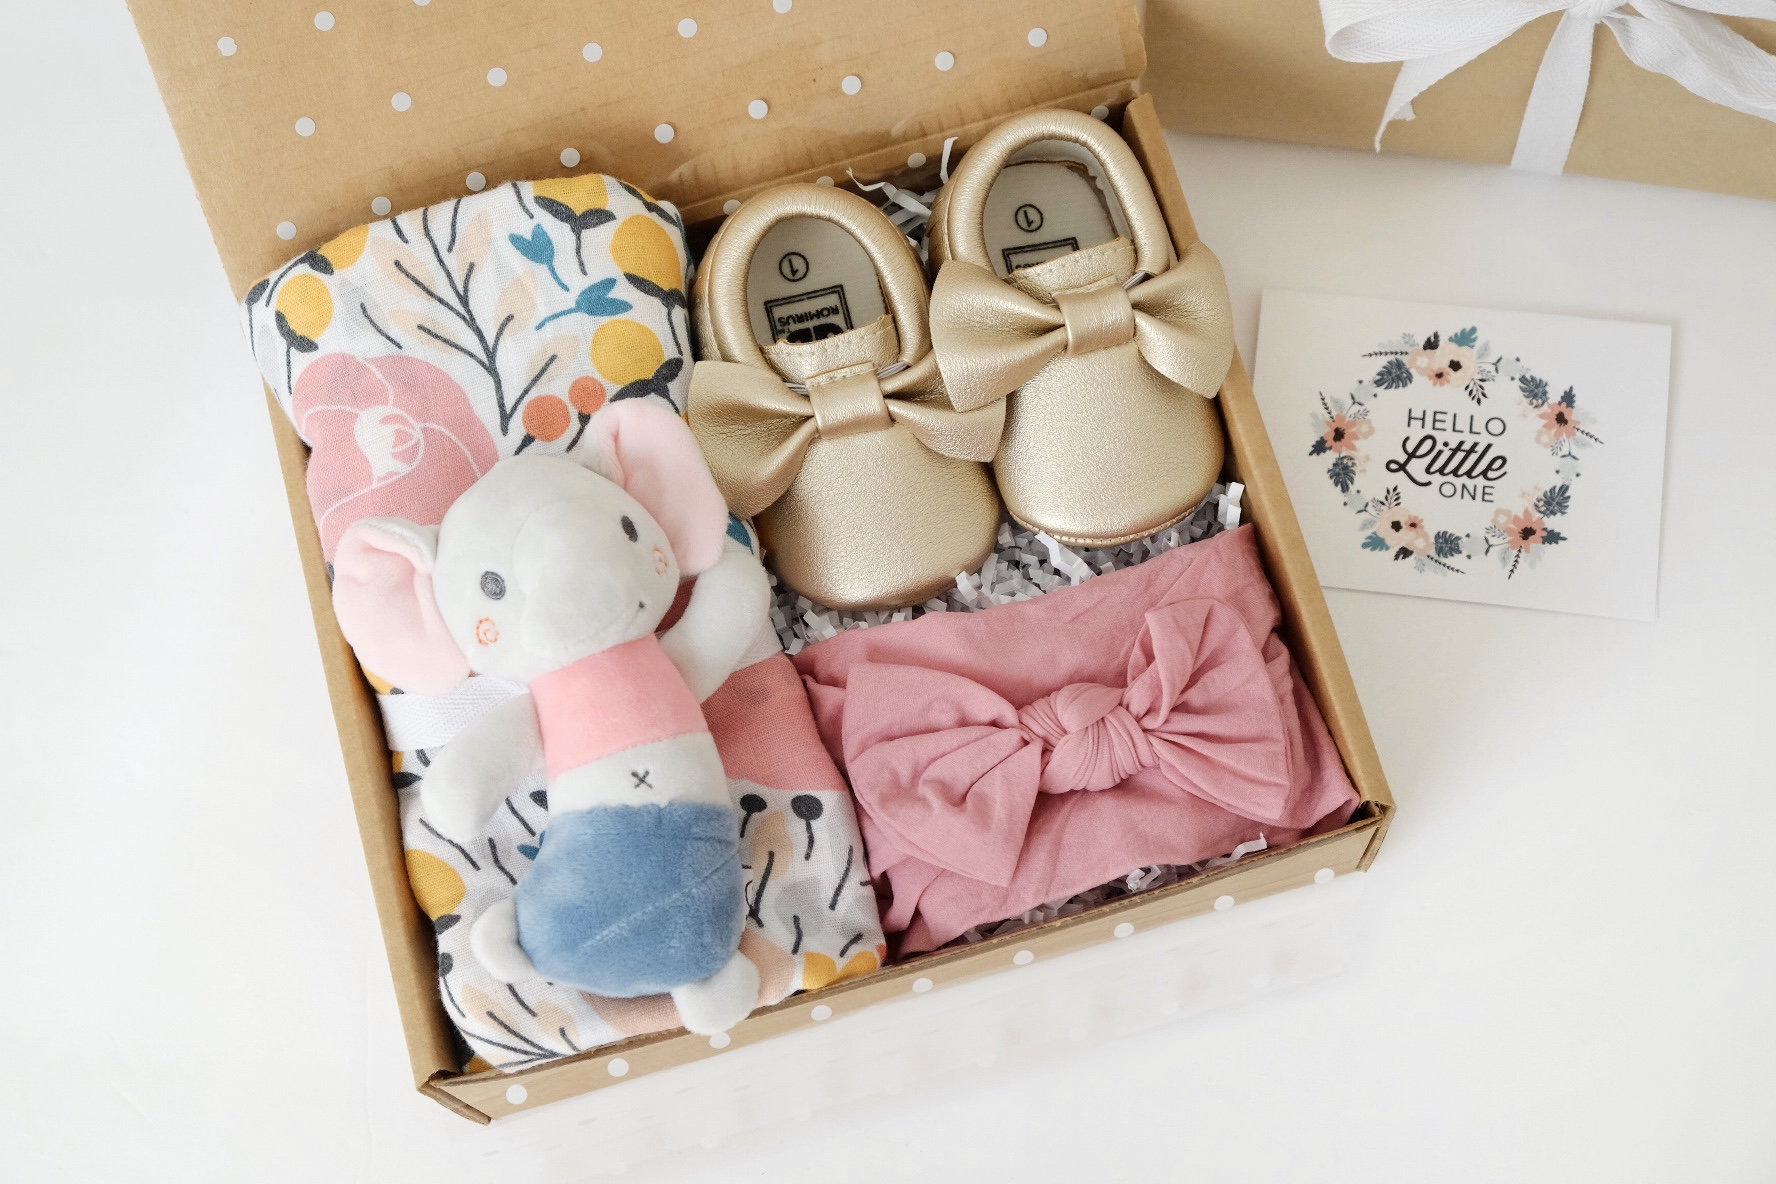 Baby Gift Box, Baby Gift Set, Ready to Ship Baby Shower Gift With Card,  Gifts for Babies, Christening Gifts, New Baby Gift, Baby Girl Gifts 